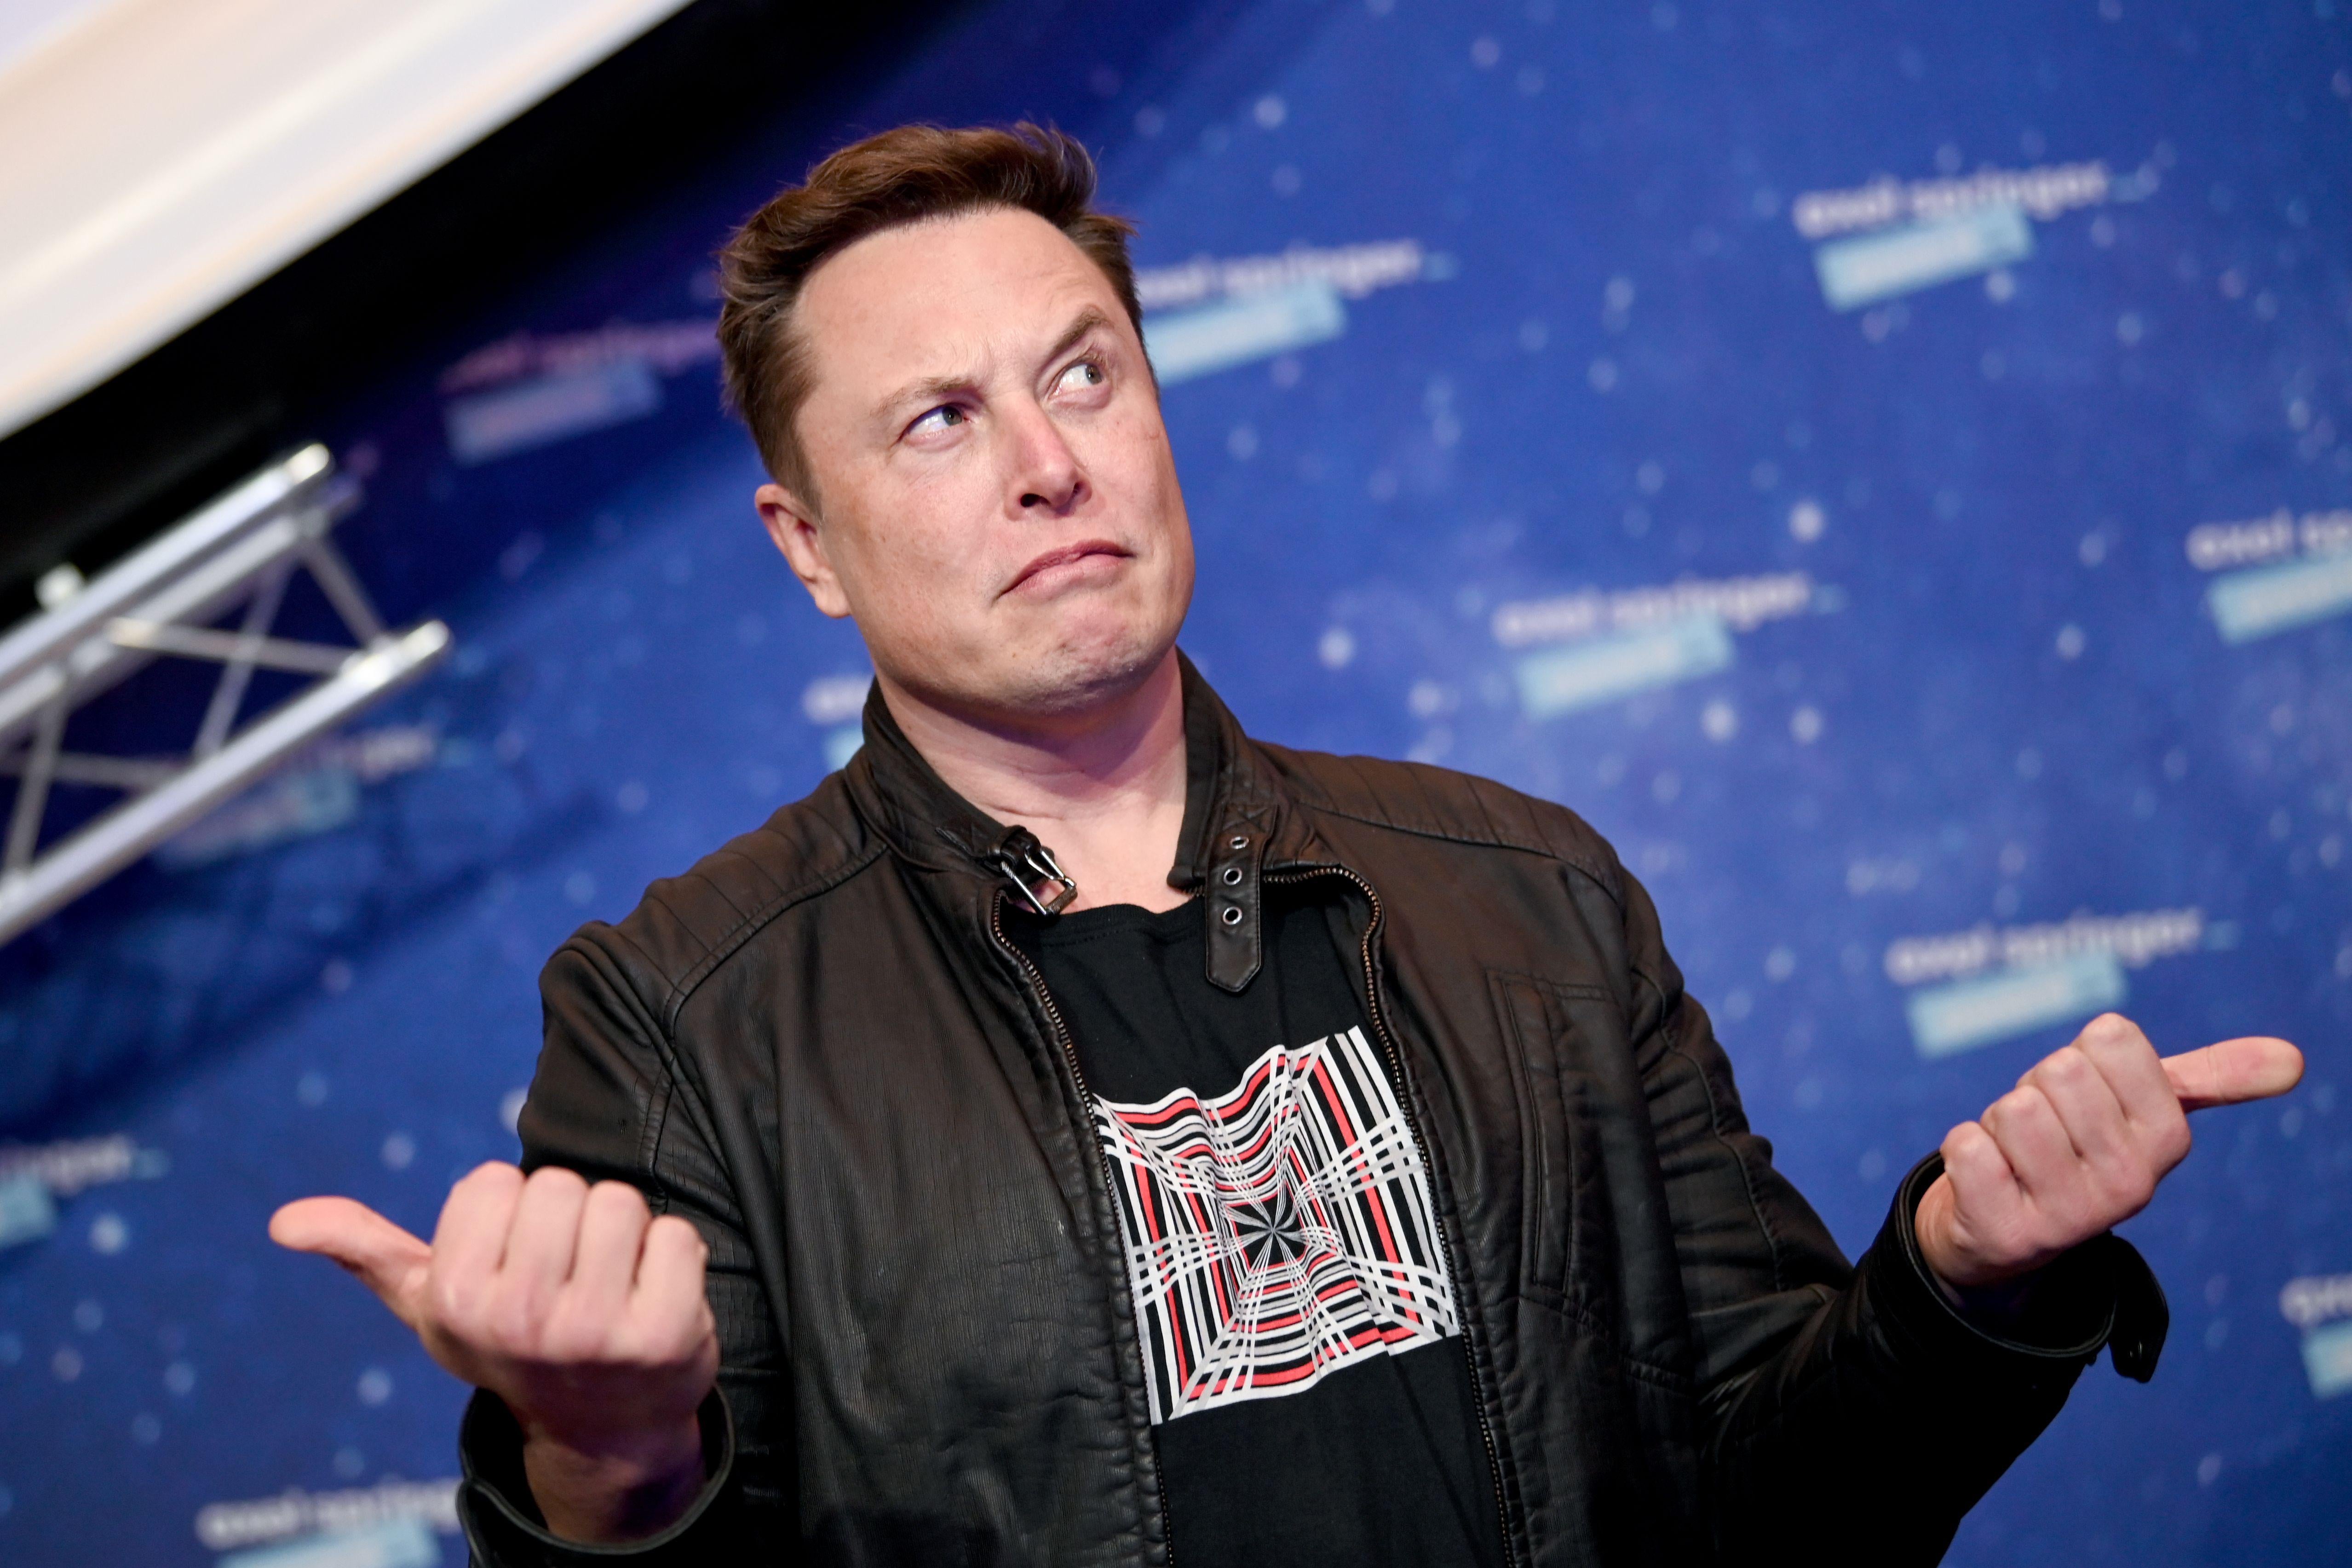 Elon Musk stands on a red carpet with a quizzical expression, making fists with both hands with the thumbs sticking out sideways